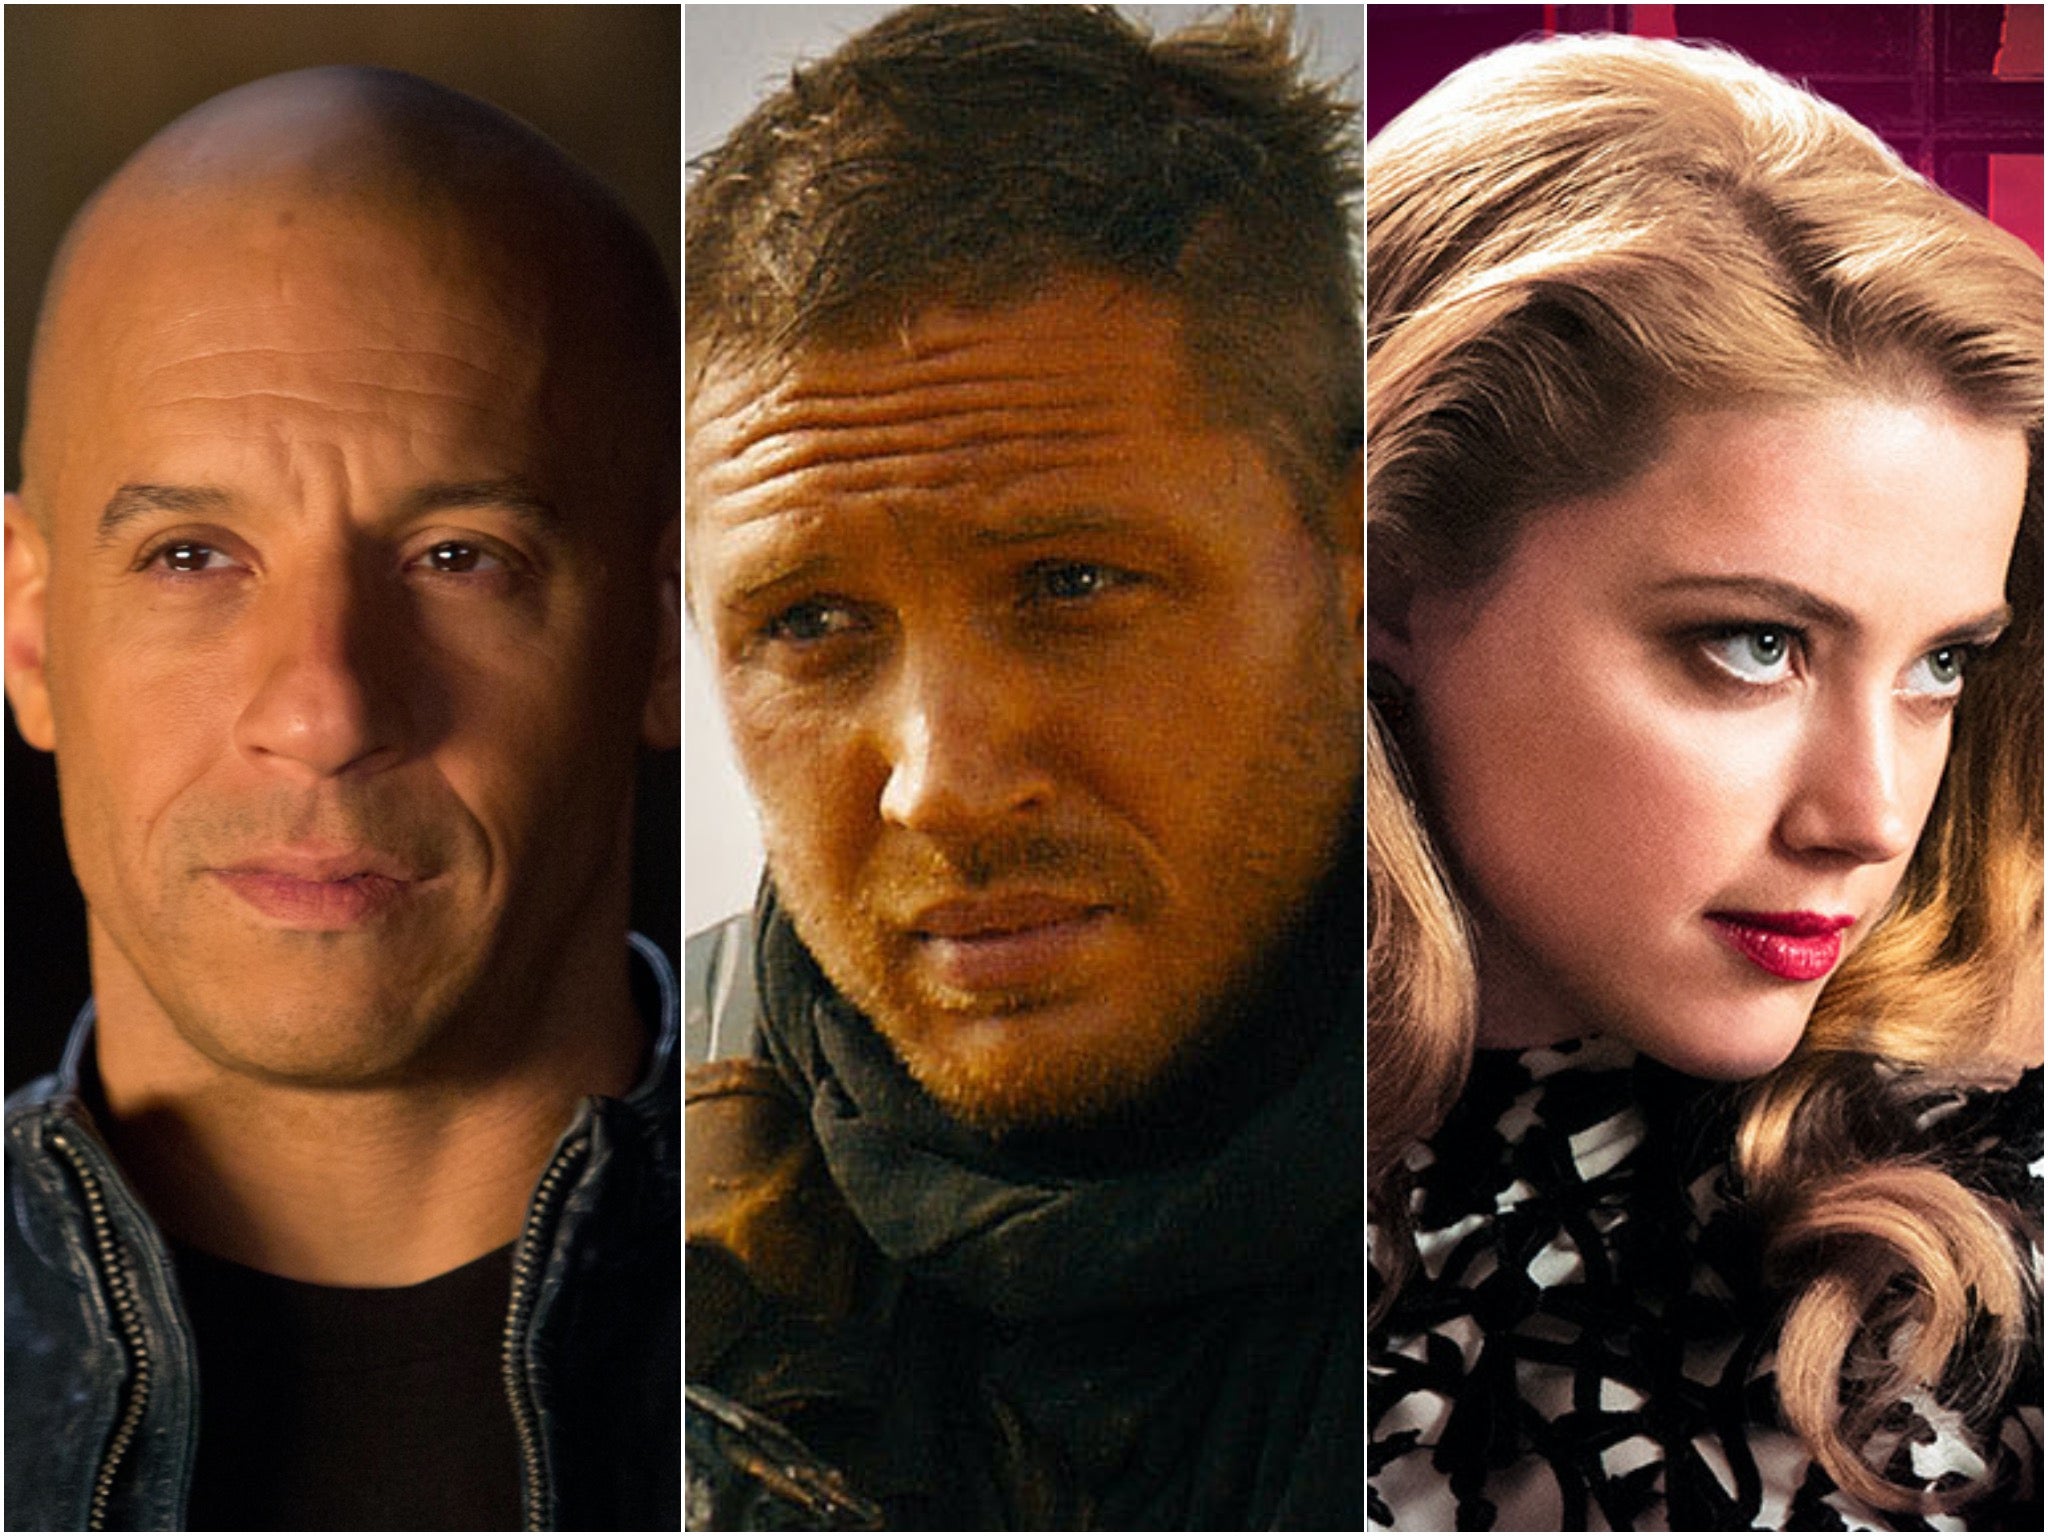 ‘Fast & Furious’ star Vin Diesel, Tom Hardy in ‘Mad Max: Fury Road’ and Amber Heard in ‘London Fields'